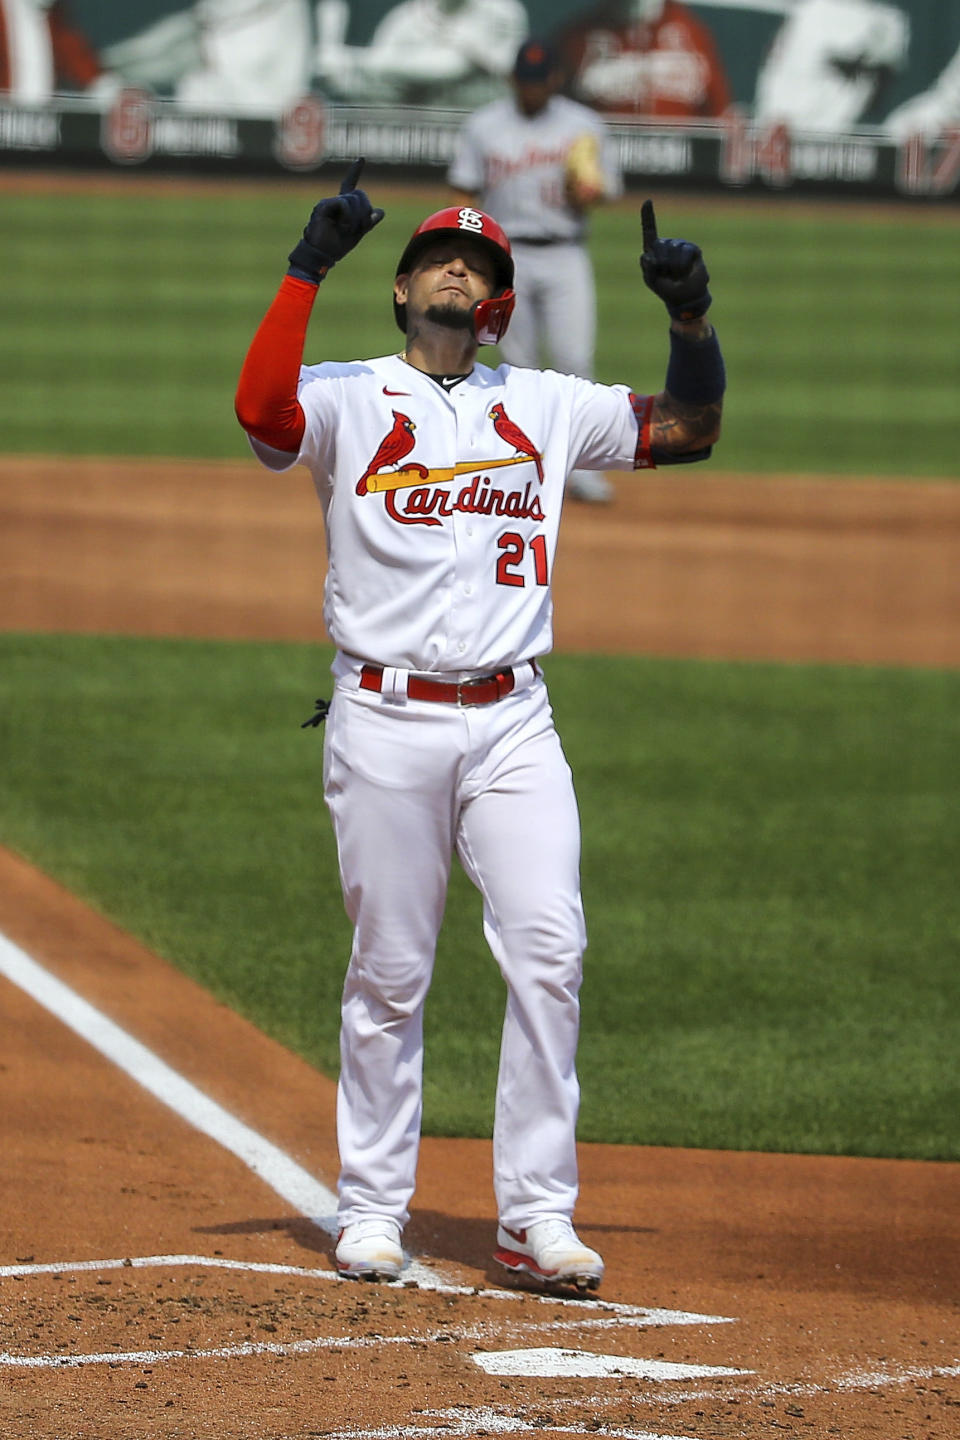 St. Louis Cardinals' Yadier Molina gestures skyward after hitting a two-run home run during the second inning in the first game of a baseball doubleheader against the Detroit Tigers Thursday, Sept. 10, 2020, in St. Louis. Molina is wearing the number 21 in honor of Roberto Clemente. (AP Photo/Scott Kane)